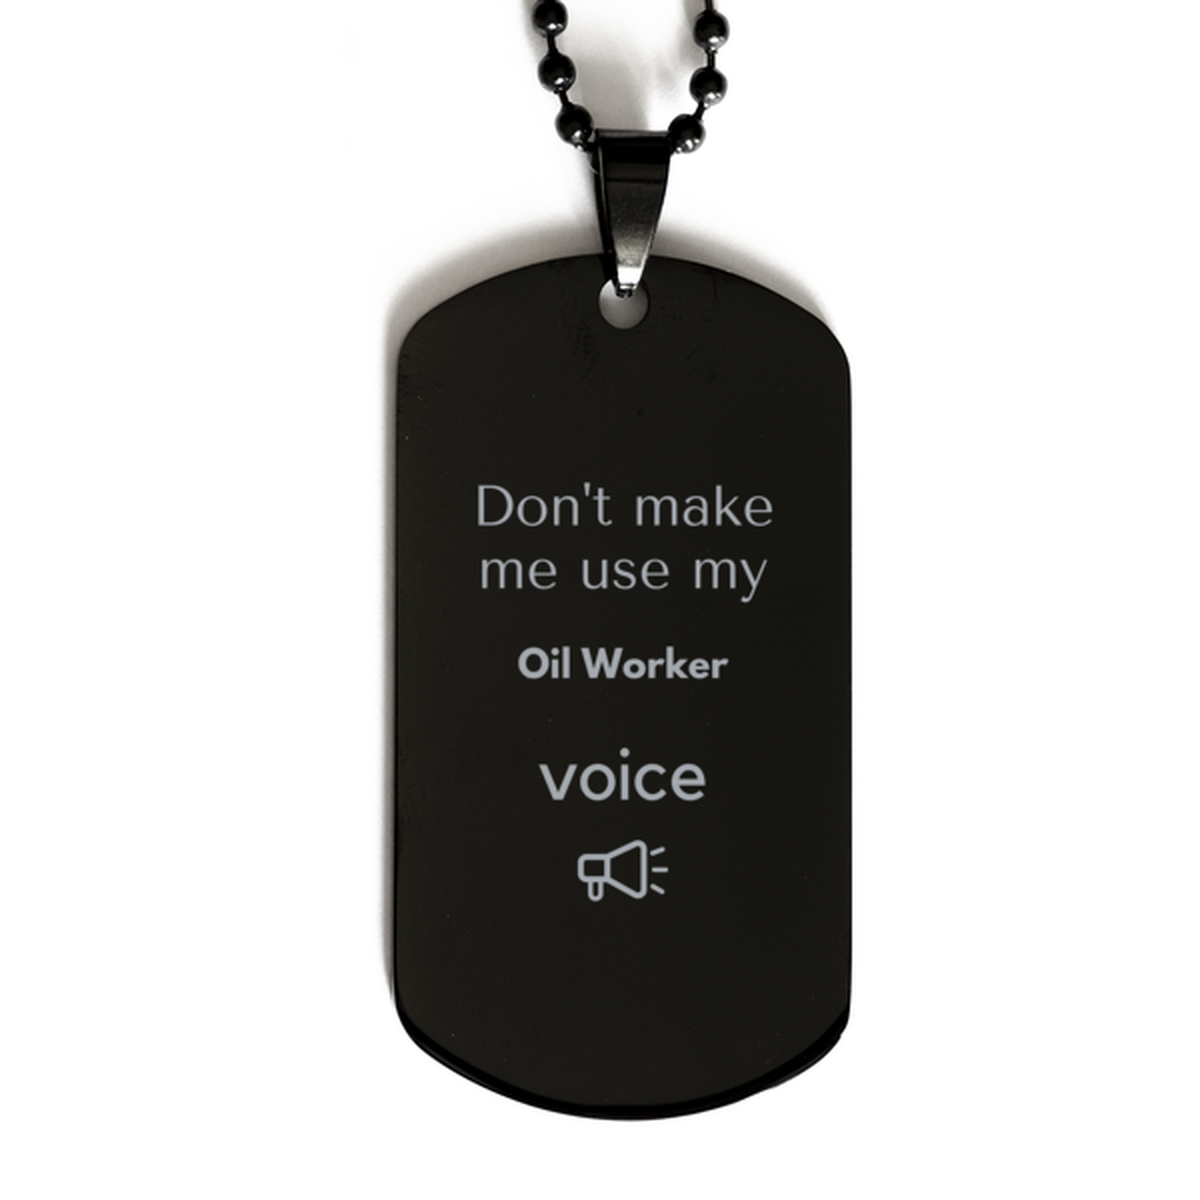 Don't make me use my Oil Worker voice, Sarcasm Oil Worker Gifts, Christmas Oil Worker Black Dog Tag Birthday Unique Gifts For Oil Worker Coworkers, Men, Women, Colleague, Friends